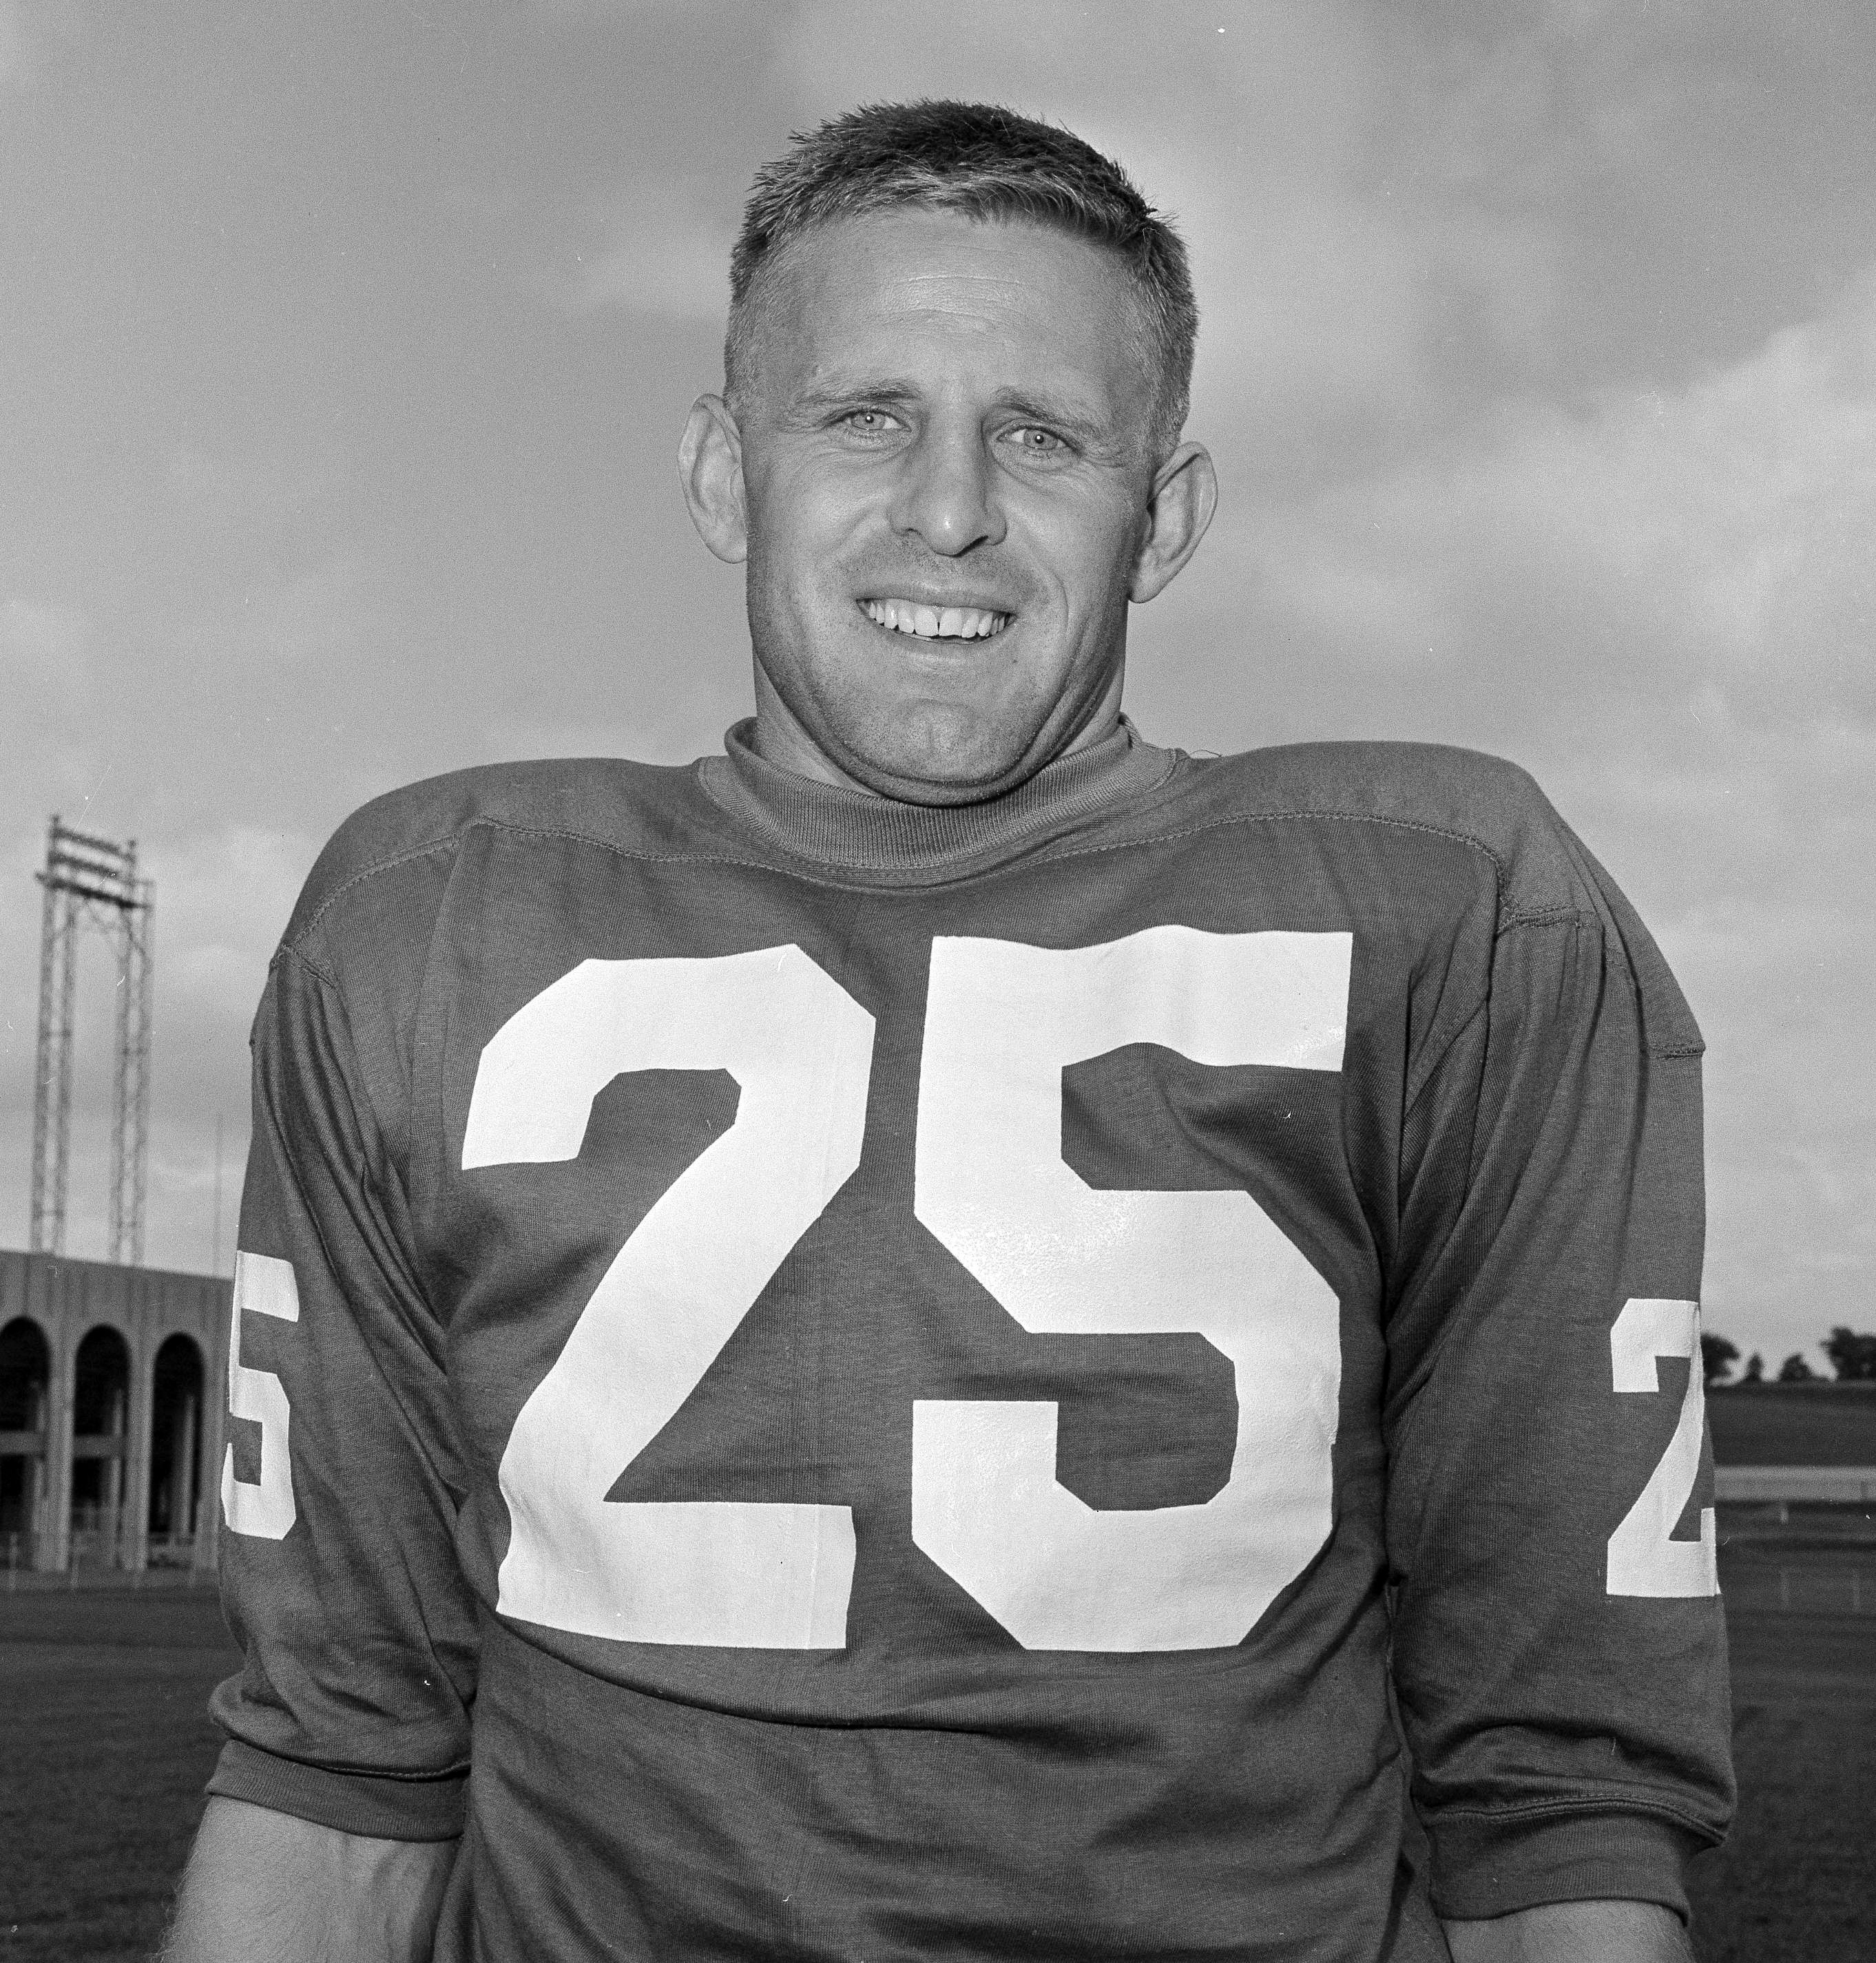 Hall of Fame receiver Tommy McDonald dies at 84